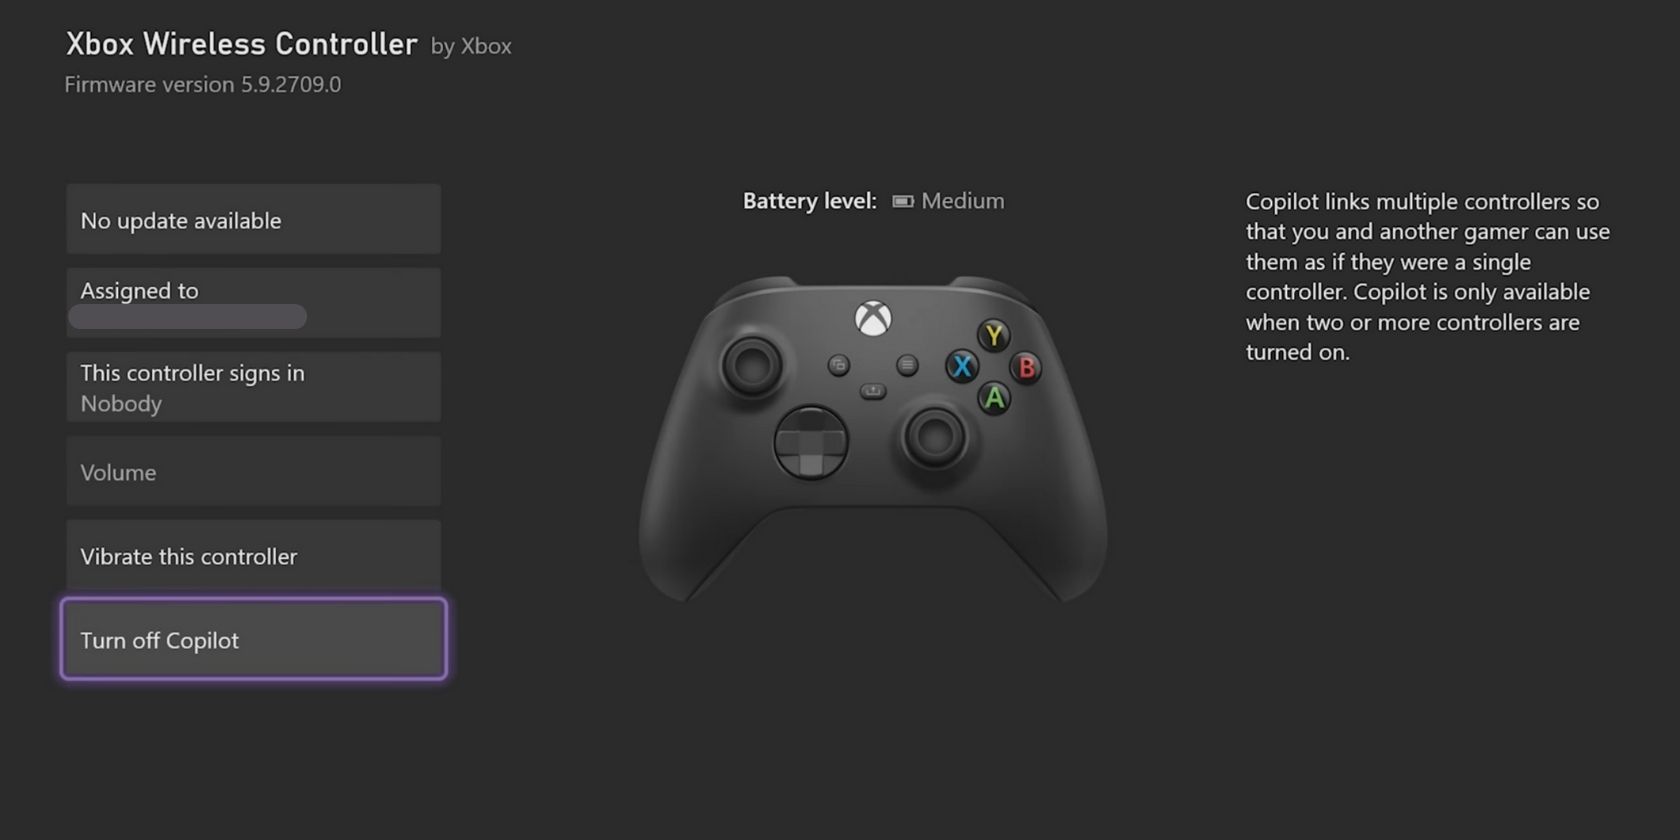 Xbox Wireless Controller Settings Turn off the Copilot feature